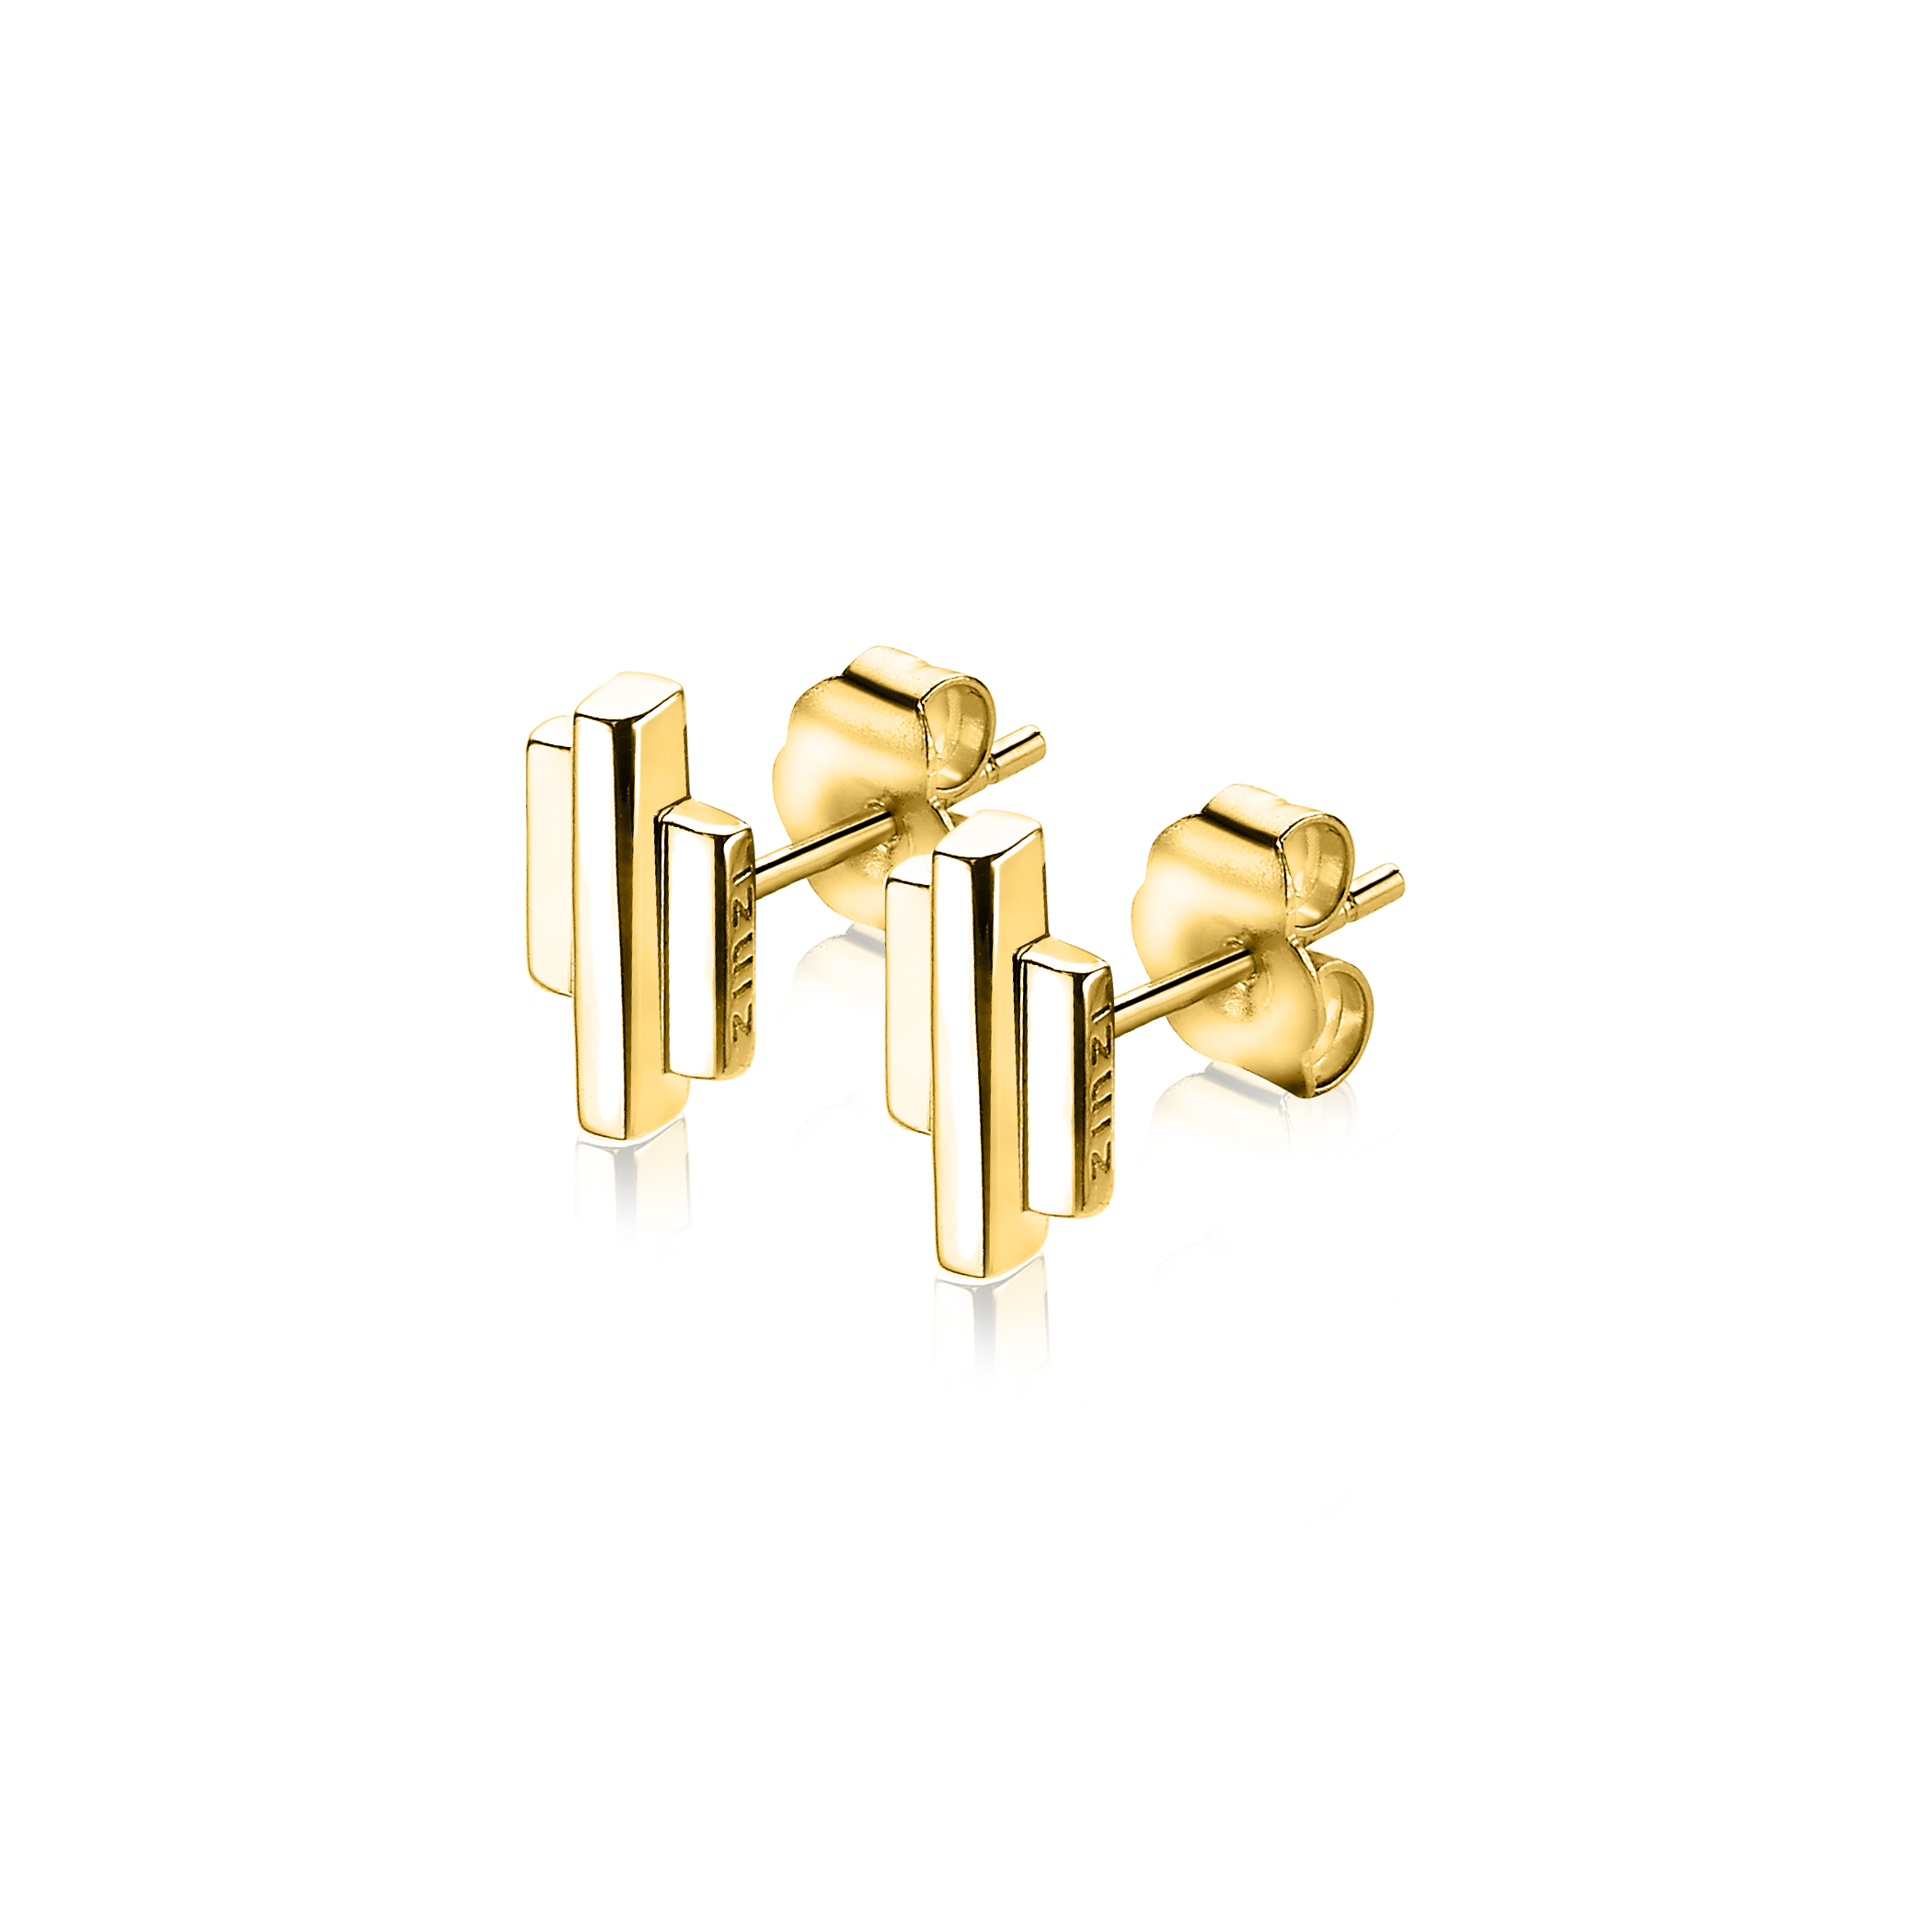 9mm ZINZI Gold Plated Sterling Silver Stud Earrings 3 Small Bars ZIO1586G